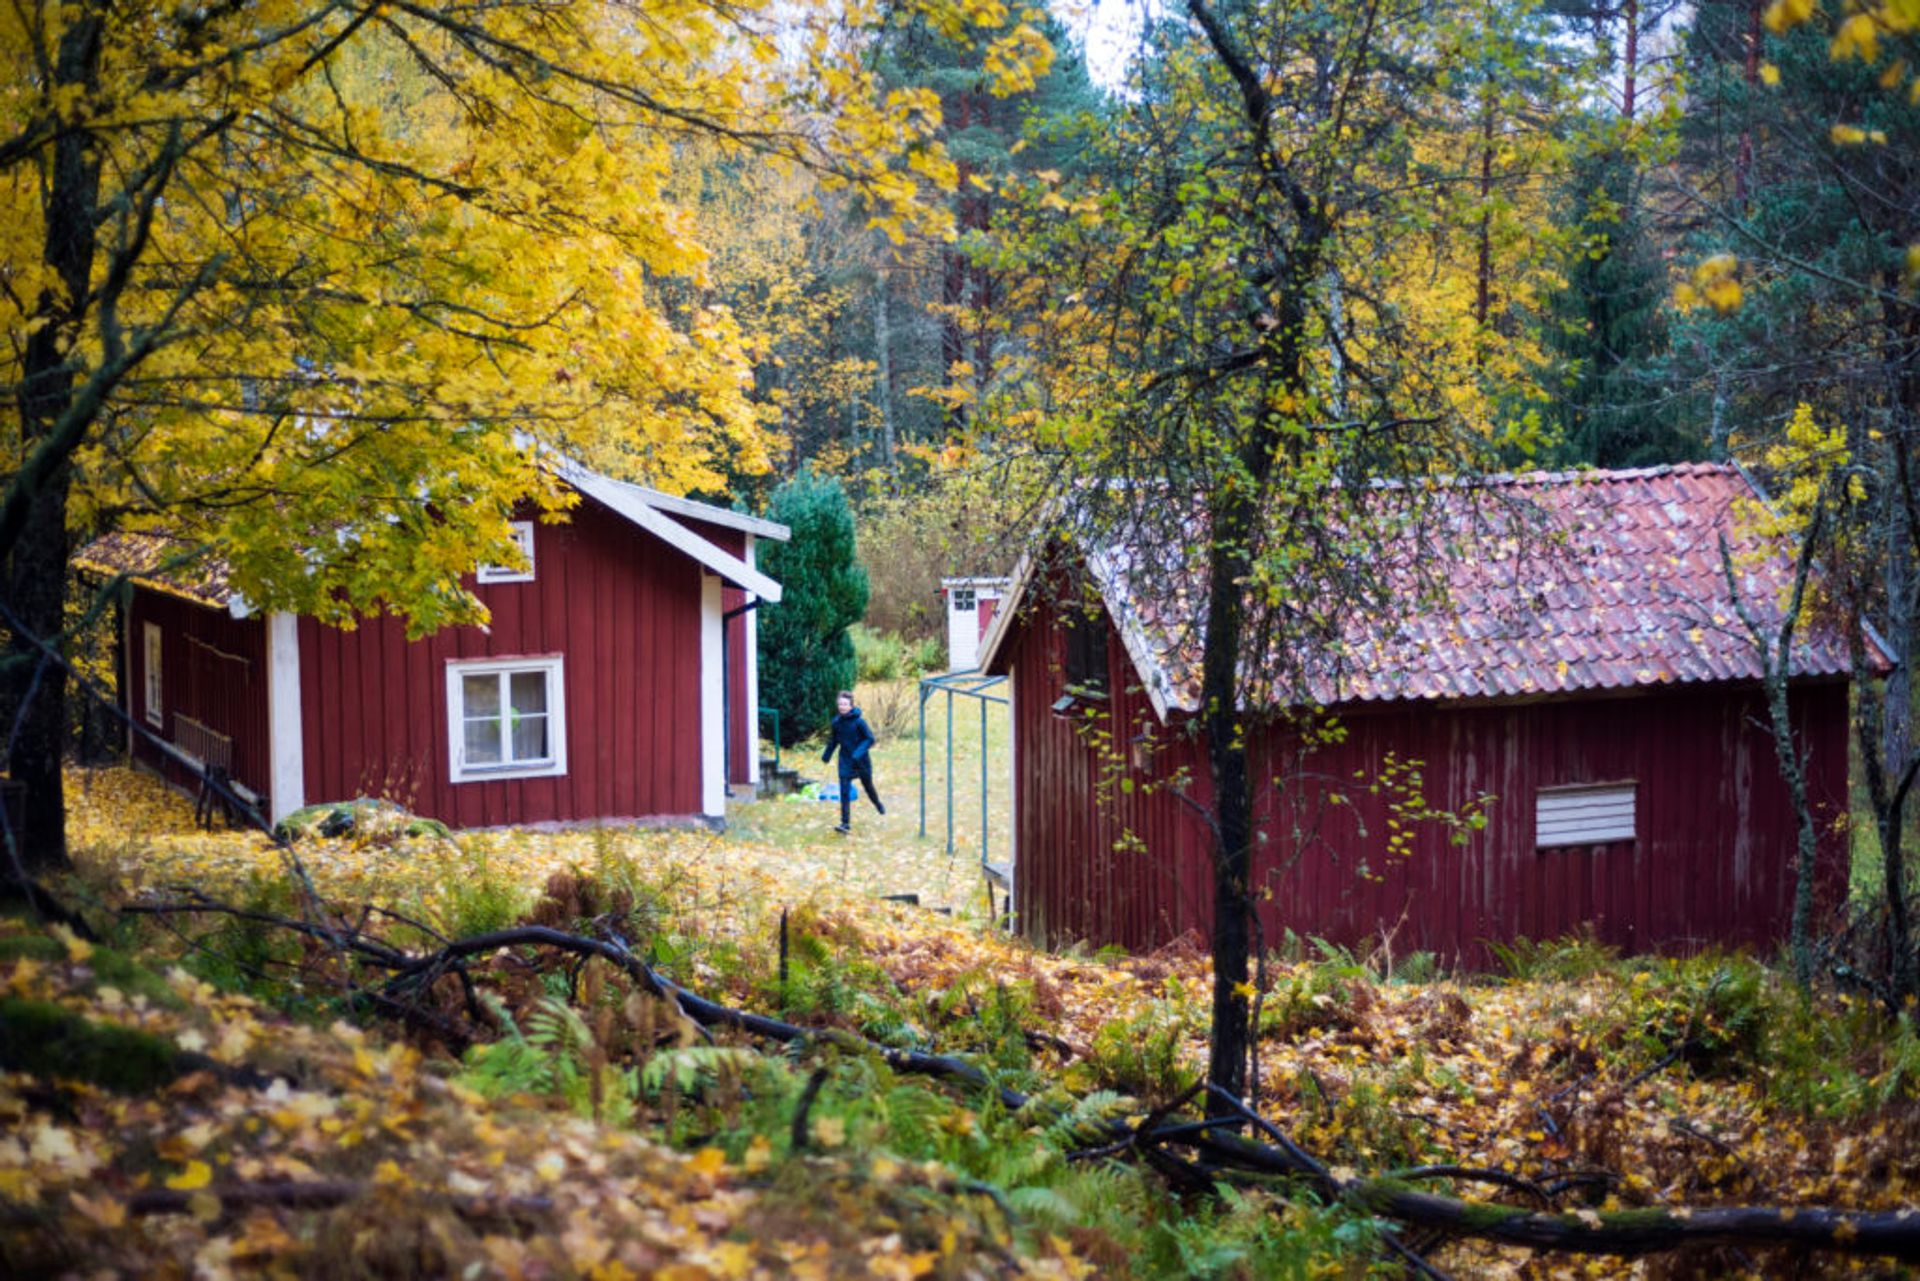 Red houses in a forest.